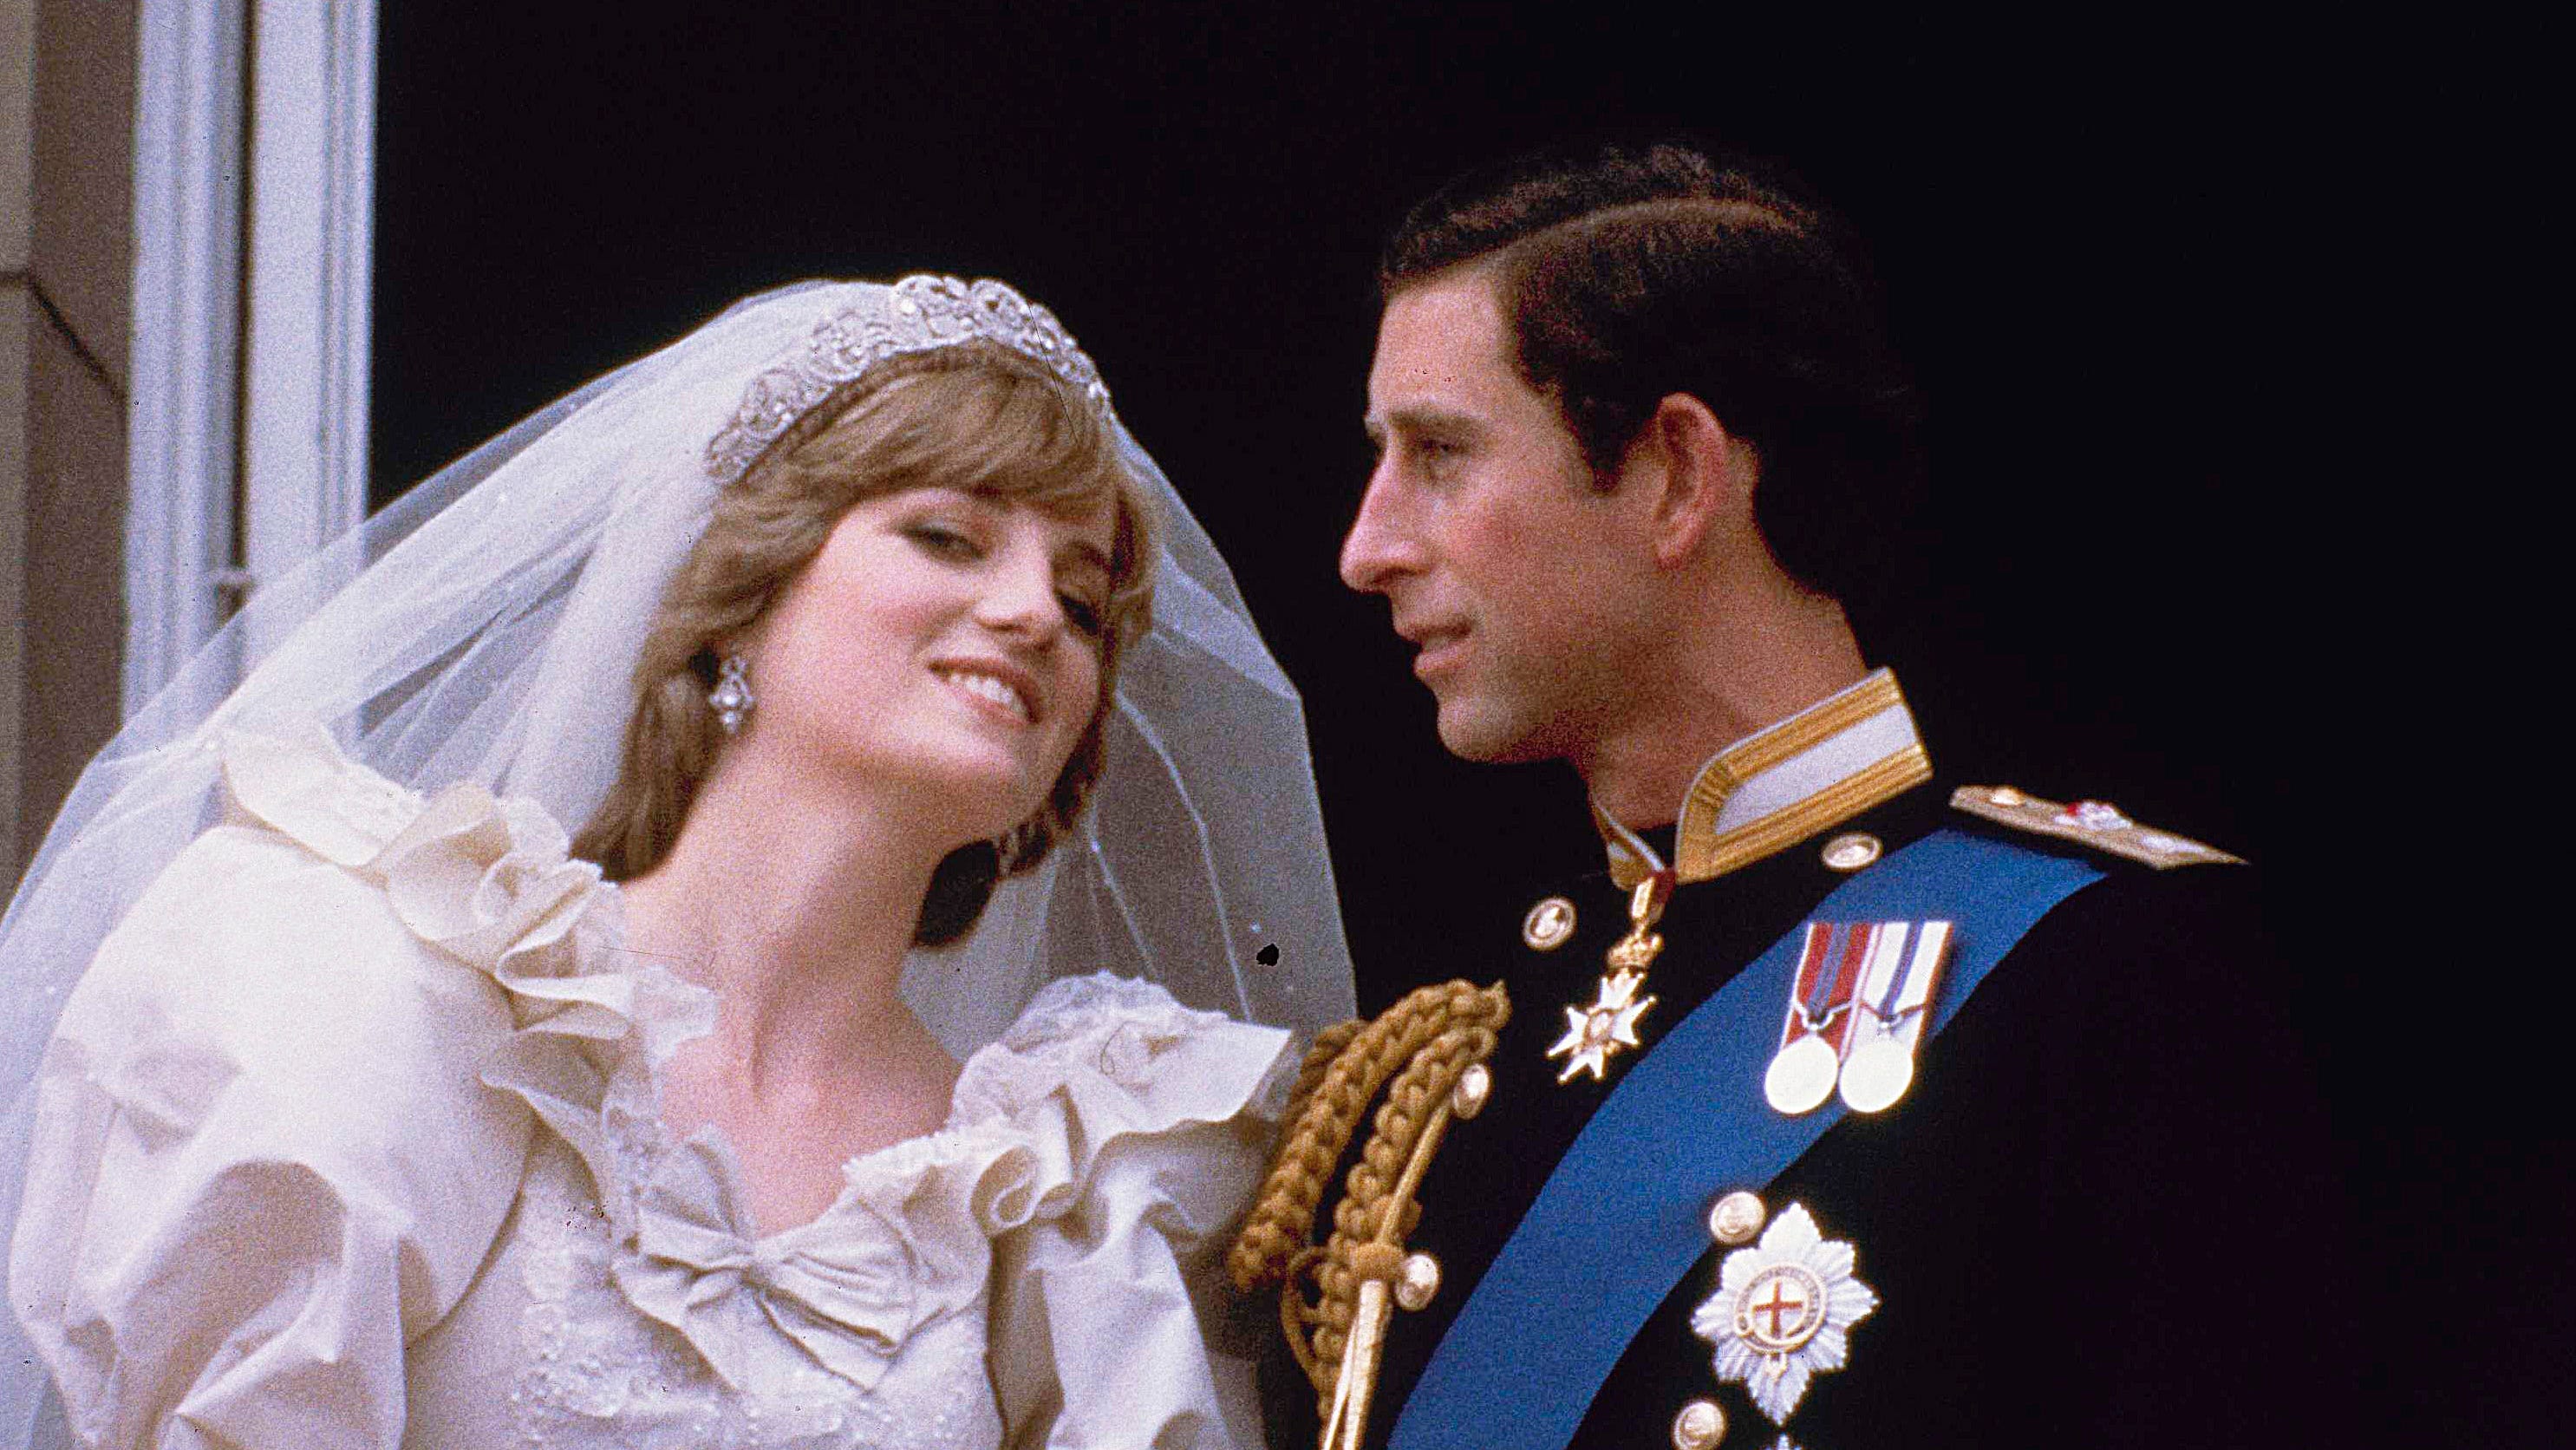 Today in History, July 29, 1981 Prince Charles and Princess Diana wed